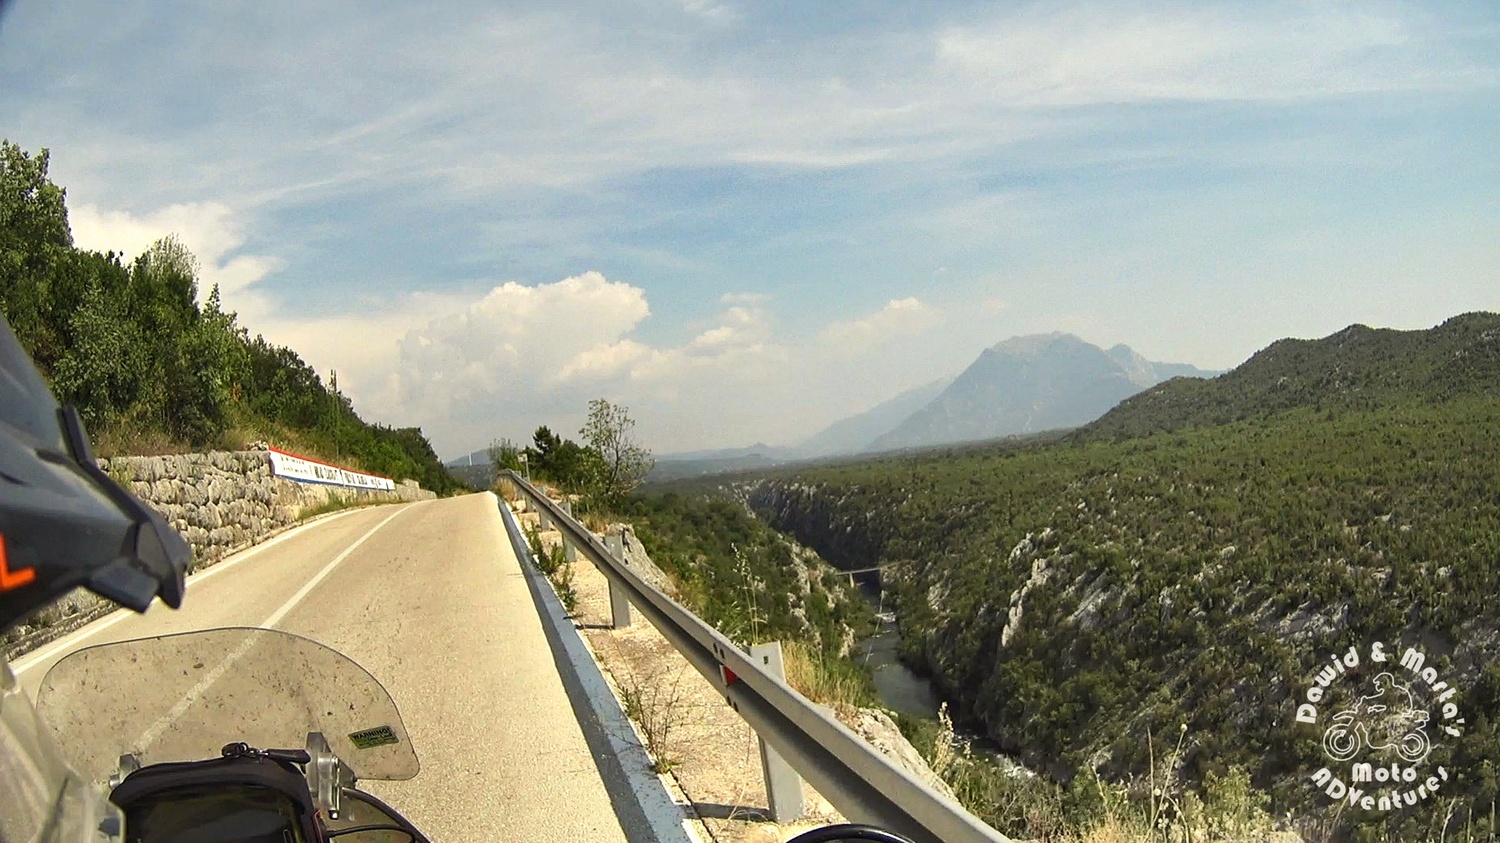 The Cetina River canyon seen from the road